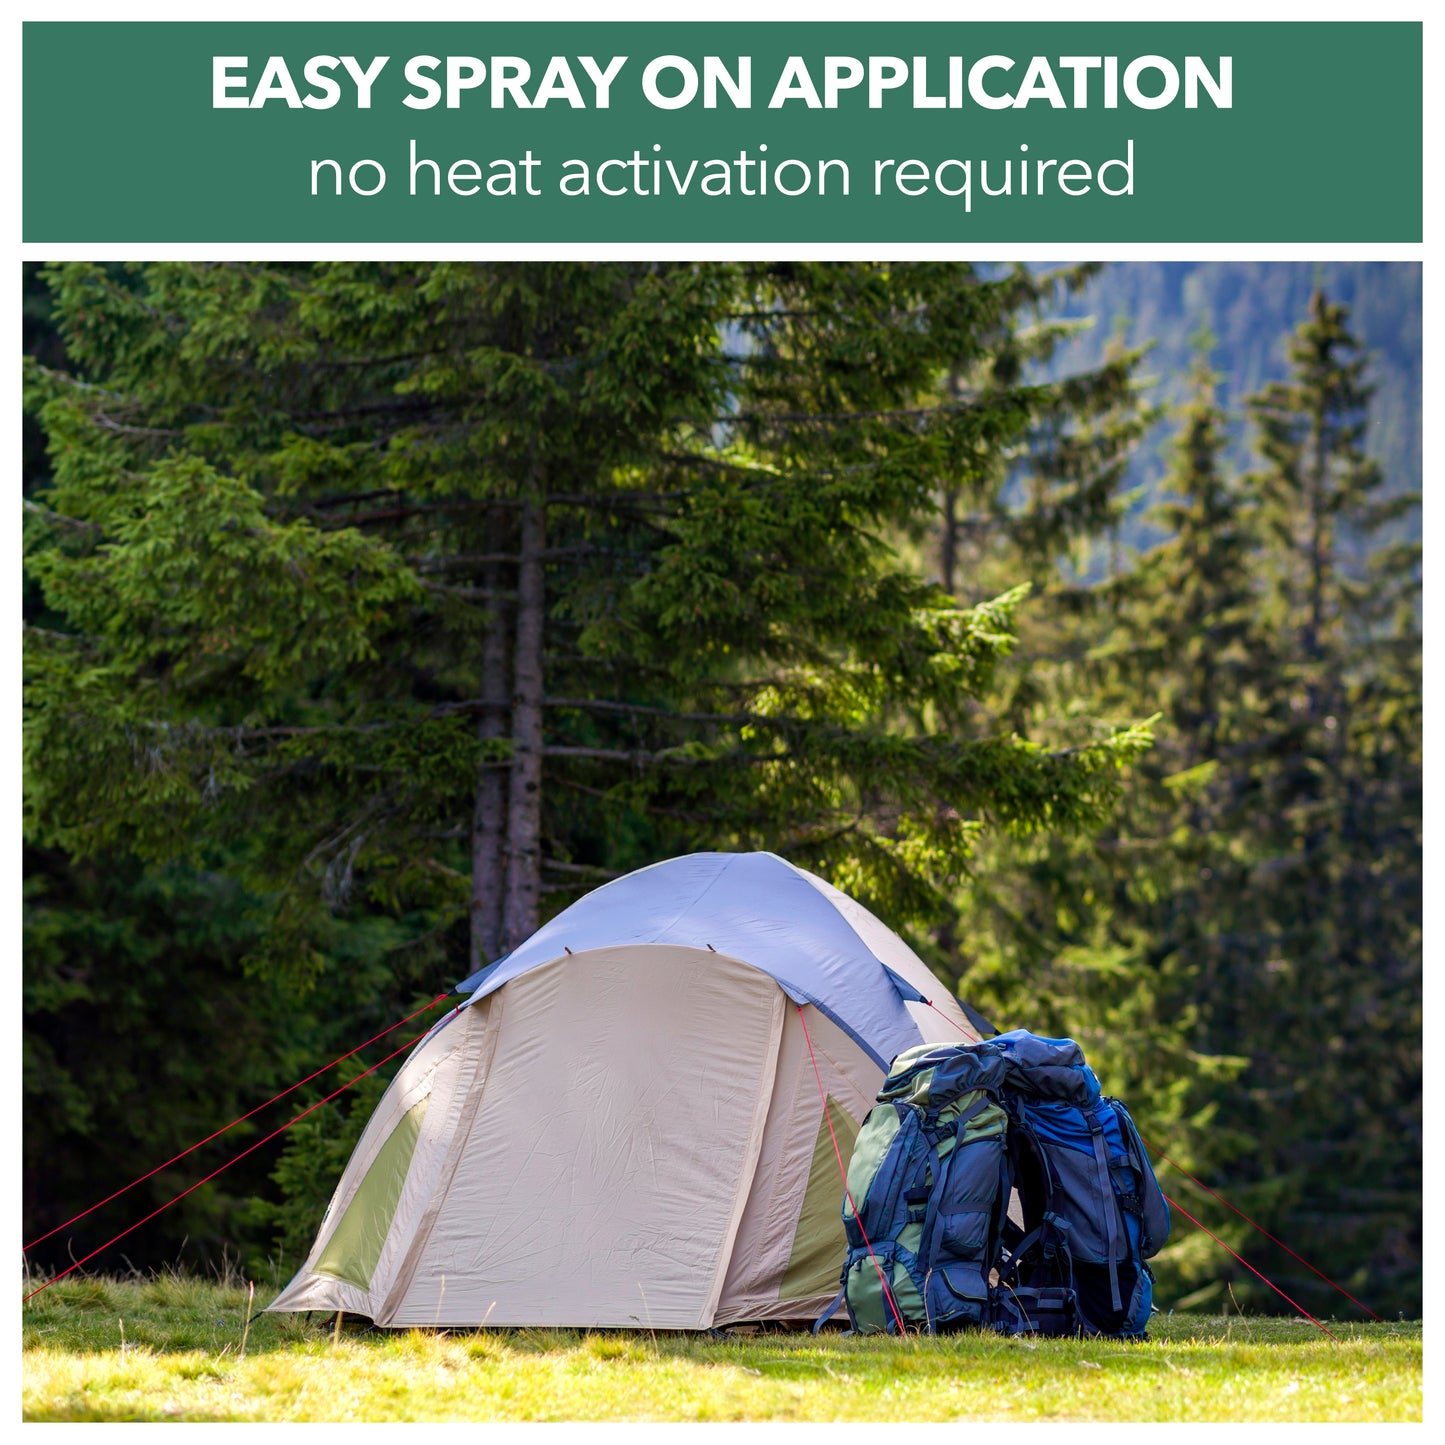 easy spray on application no heat activation required